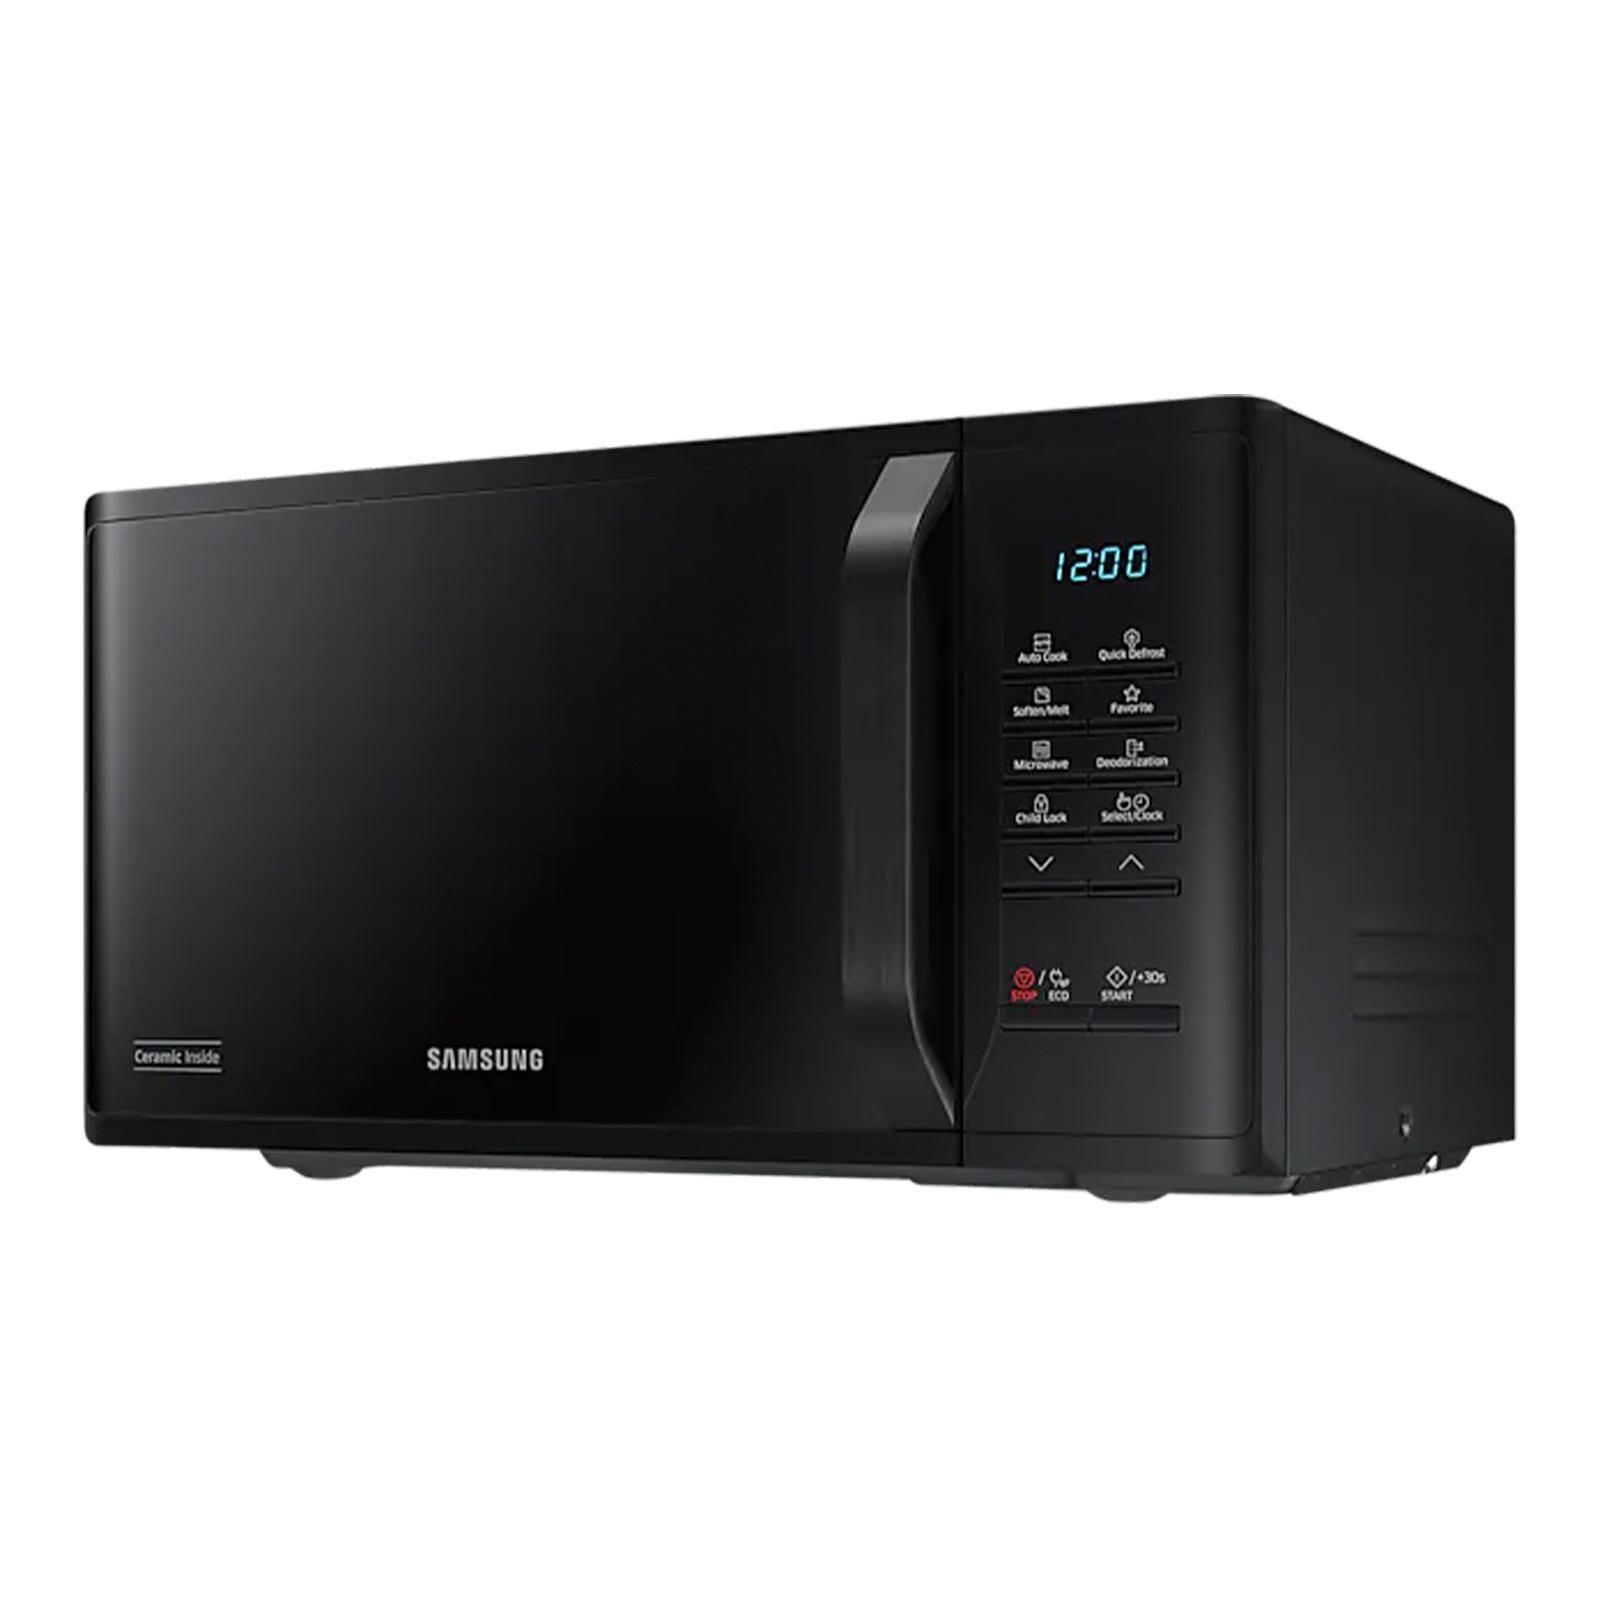 Samsung Microwave Oven Price List in India (November 2022)